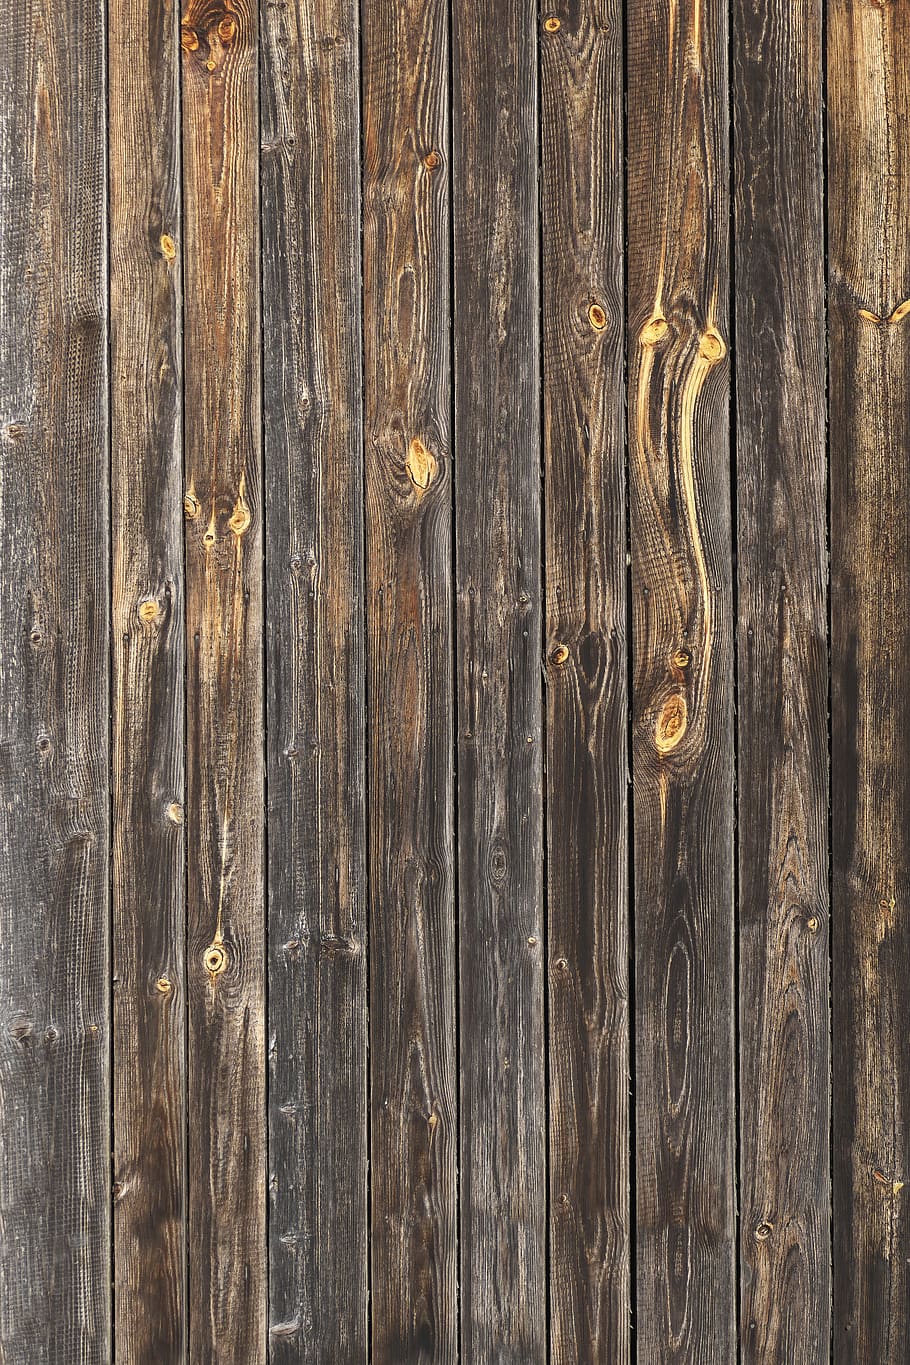 wooden boards, boards, wooden gate, old, weathered, branches, battens, wood, board, background